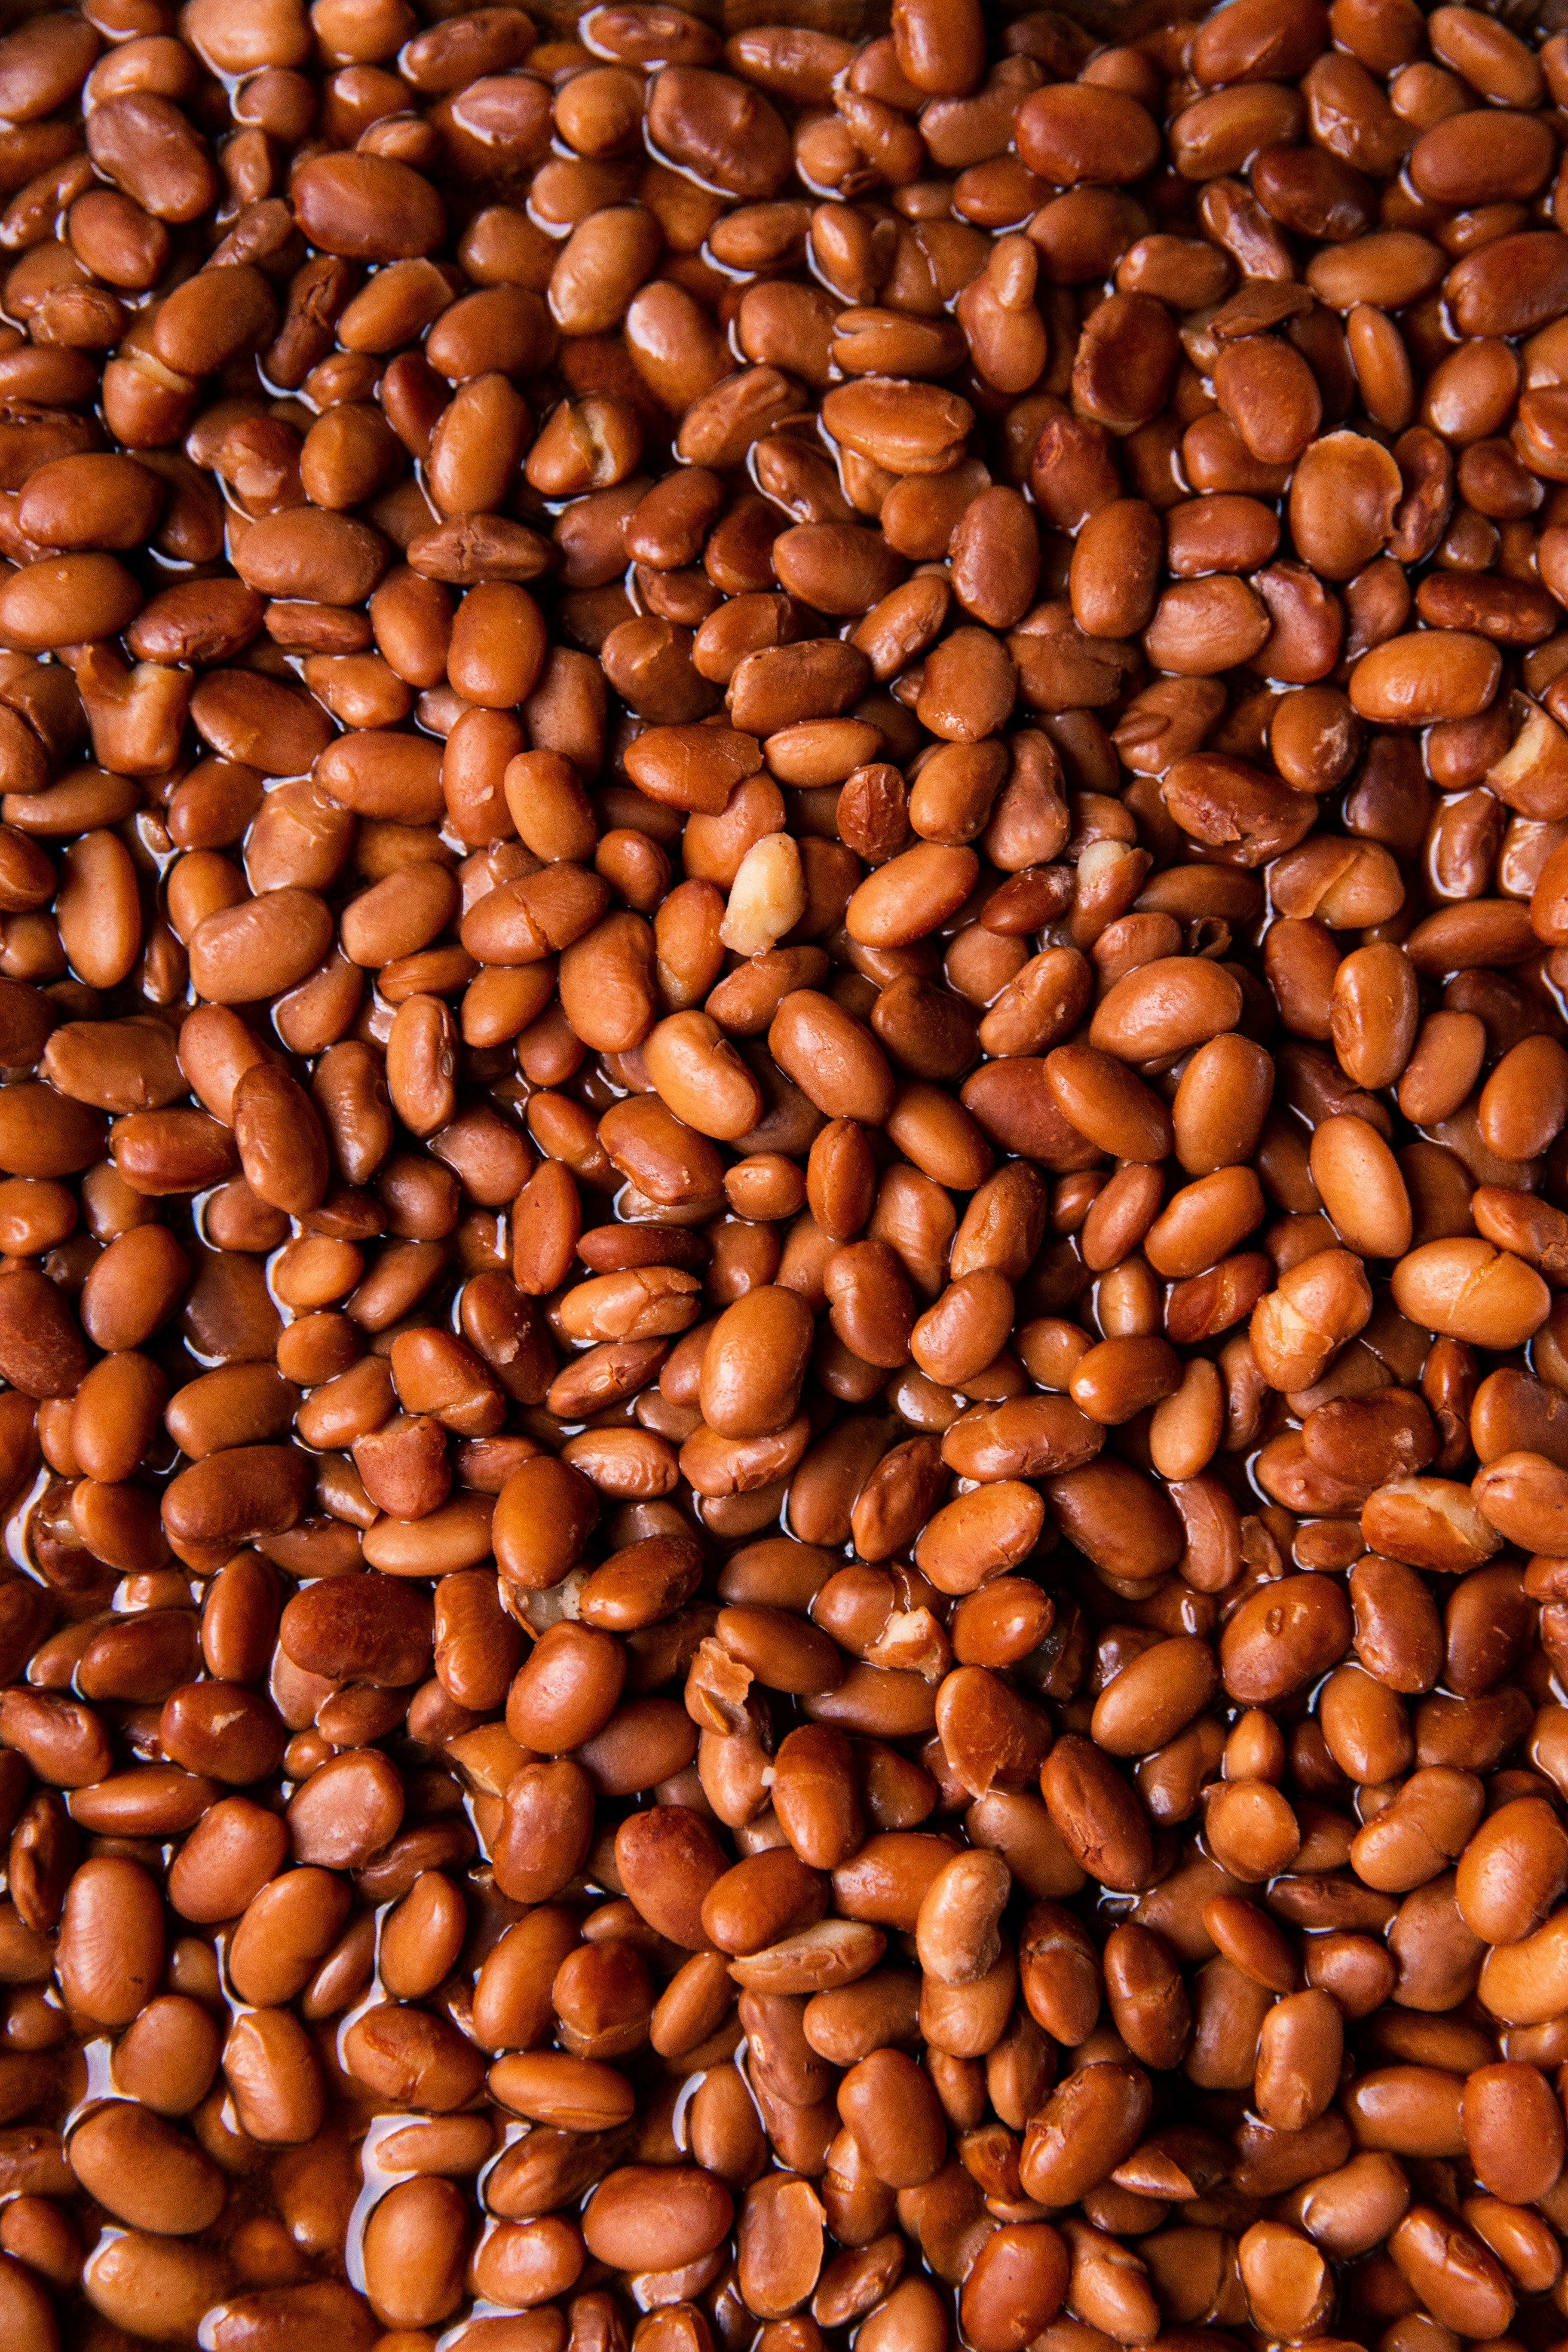 How Long Does Pinto Beans Last In The Refrigerator? | Fridge.com